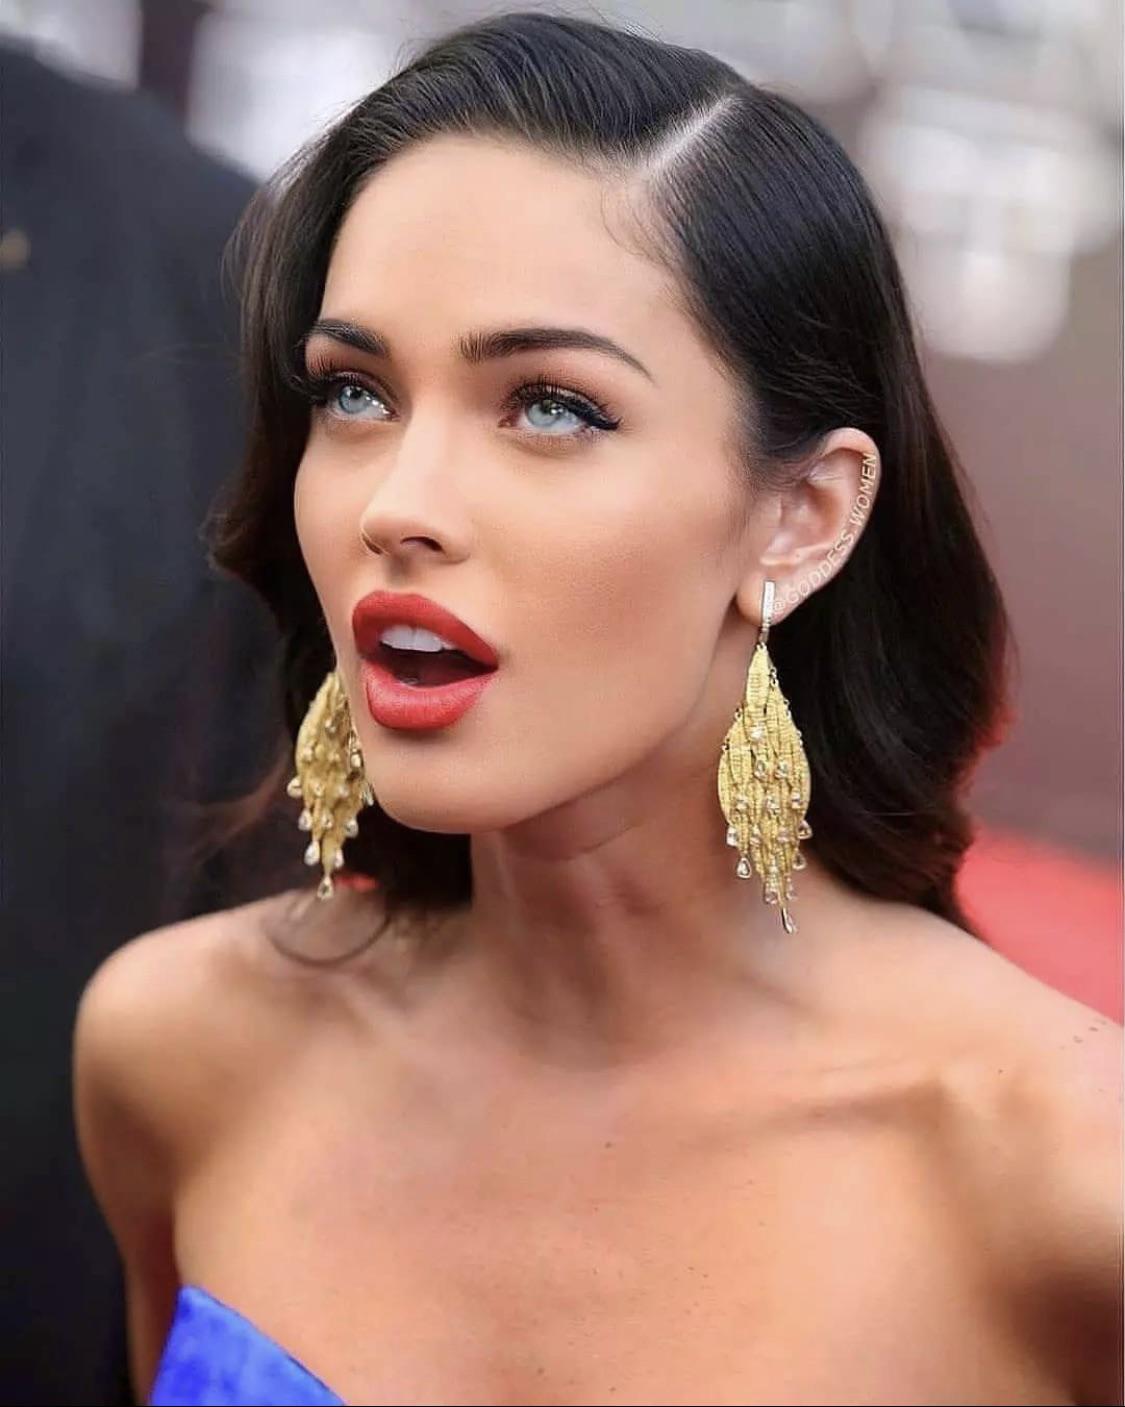 Megan Fox When She Sees Your Dick For The First Time Scrolller 